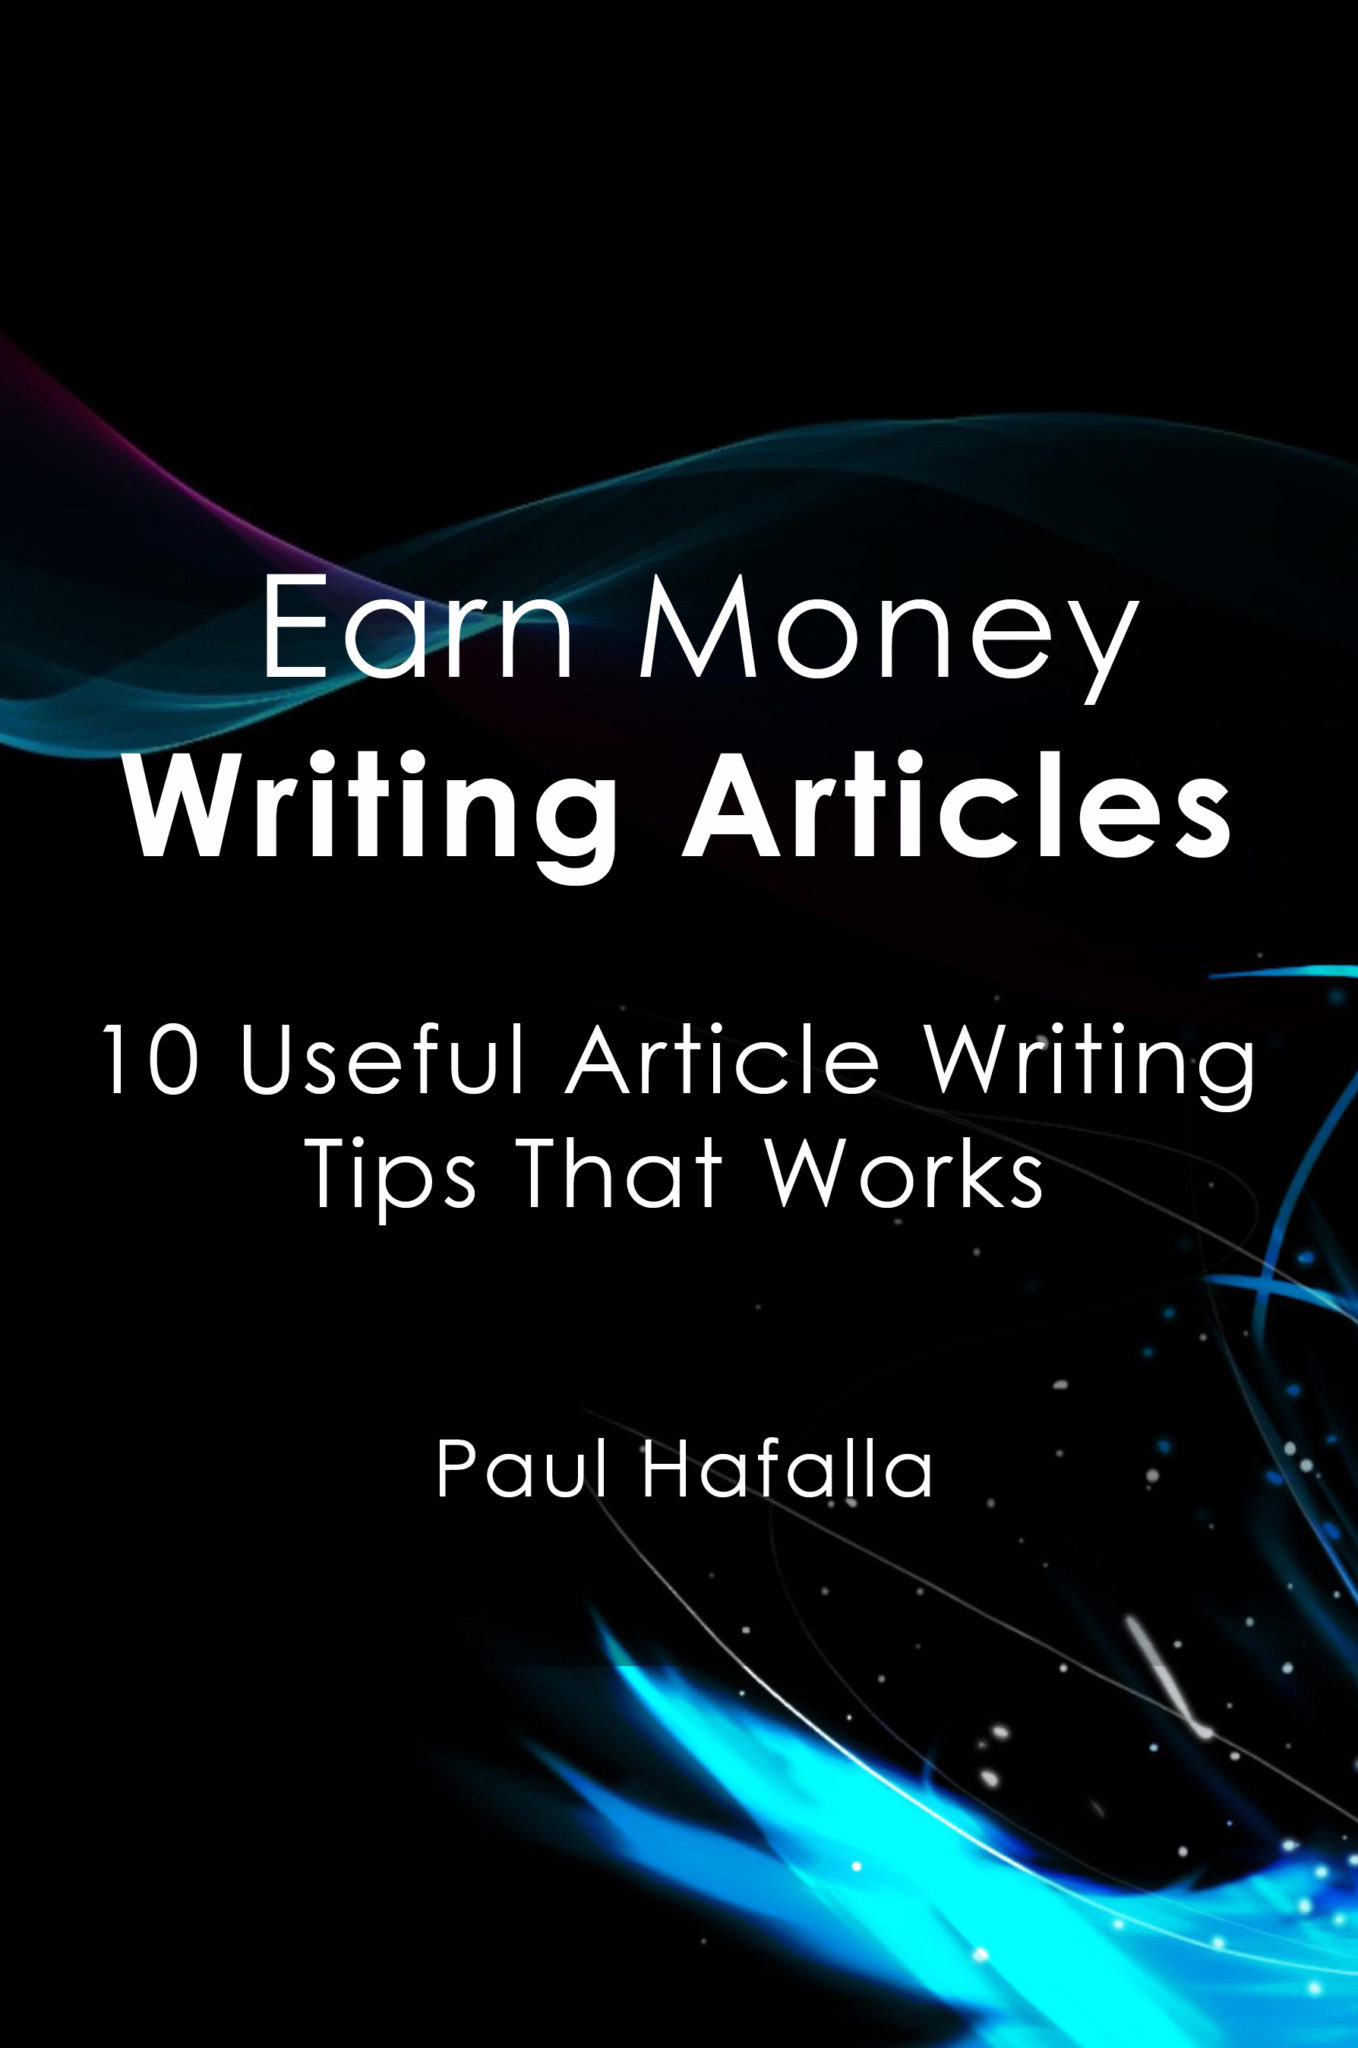 FREE: Earn Money Writing Articles: 10 Useful Article Writing Tips That Works by Paul Hafalla